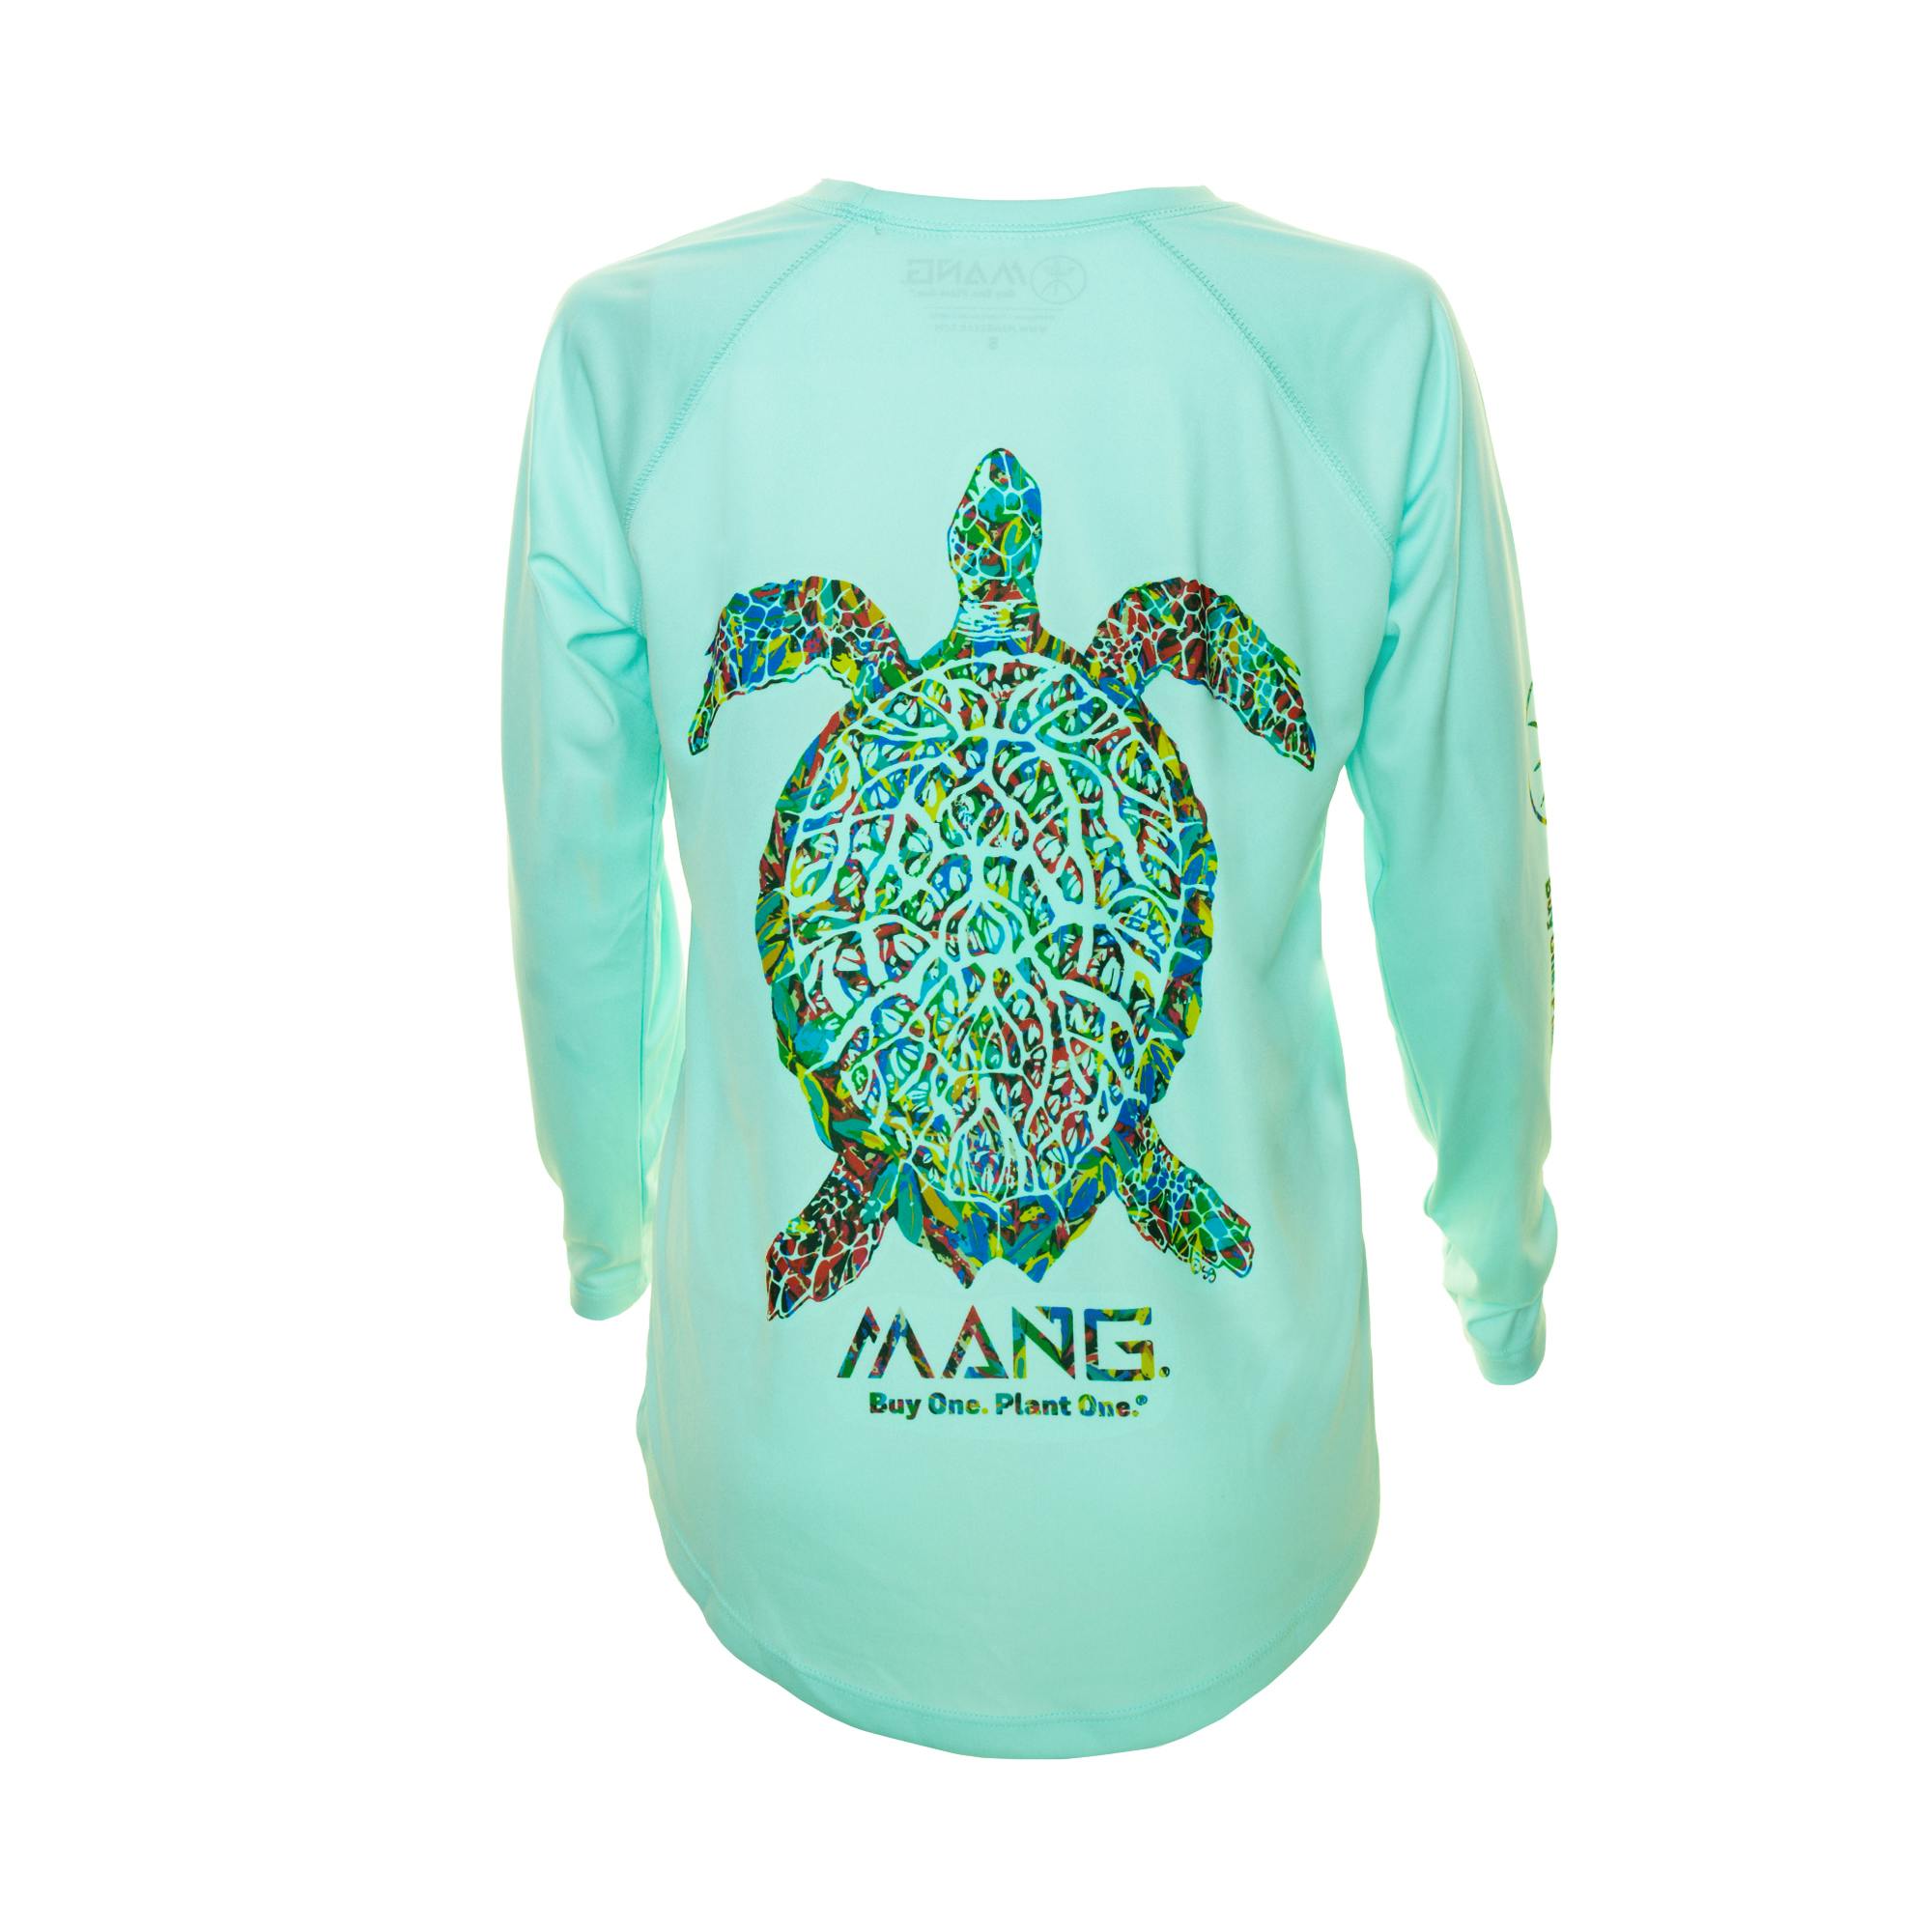 MANG Planting Hope Turtle Long Sleeve Performance Shirt (Women's) - Seagrass